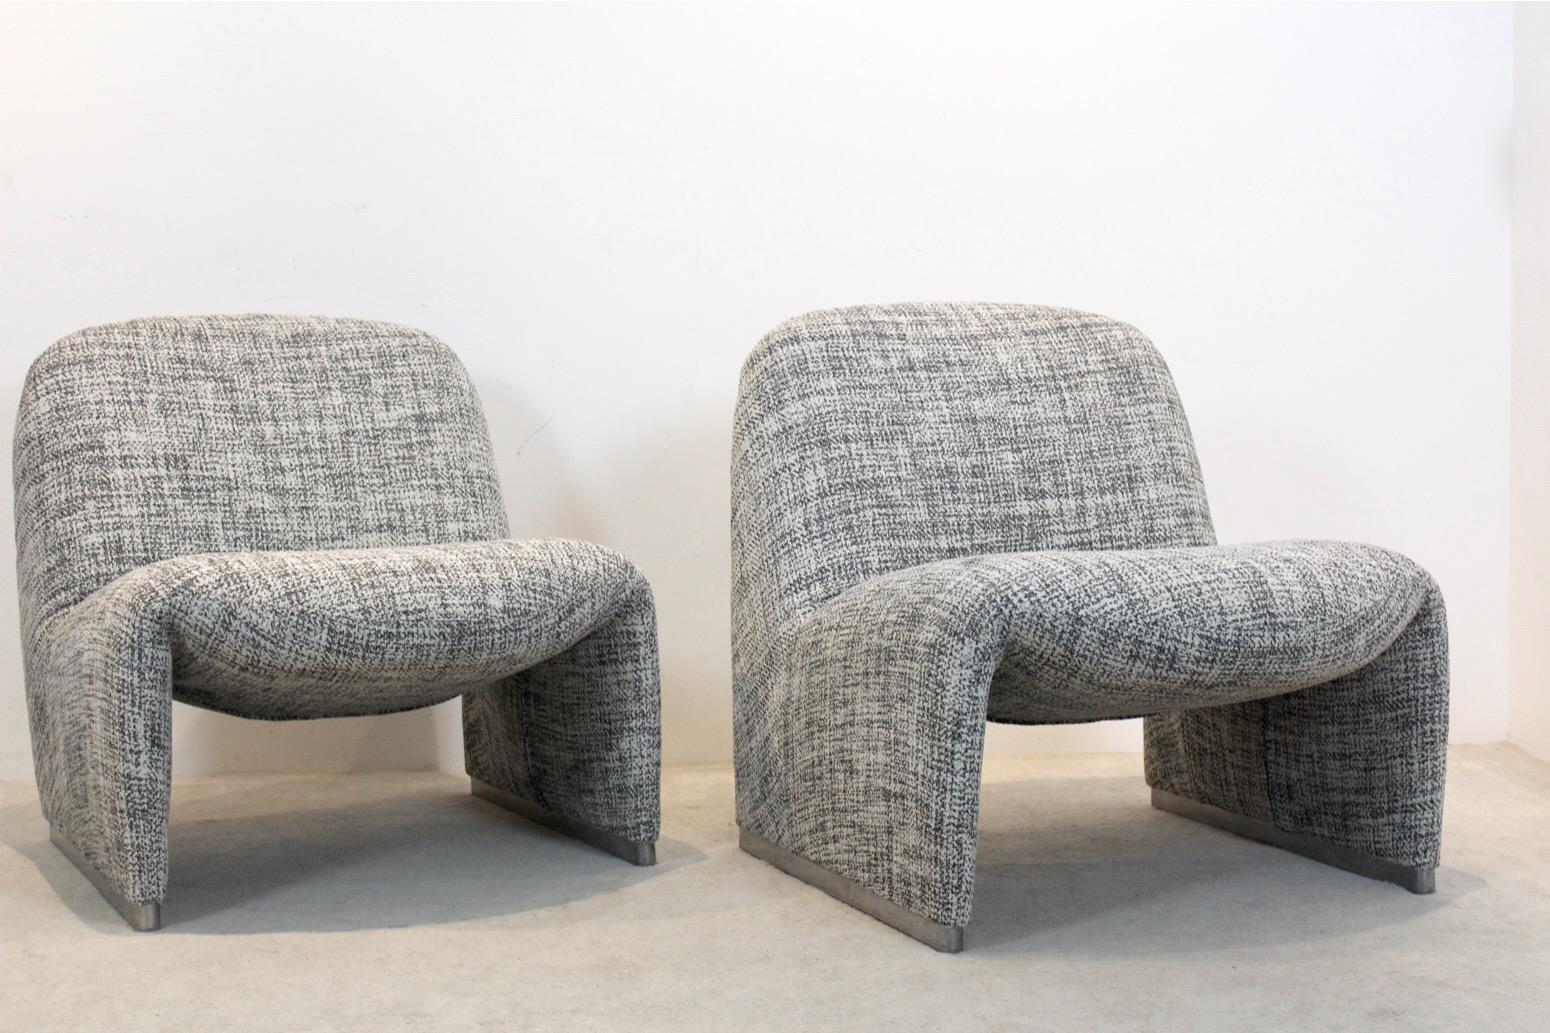 These Sculptural Alky chairs are designed by Giancarlo Piretti in the ‘70s for Artifort. Piretti is renowned for his innovative and functional furniture designs, particularly in the realm of ergonomic seating. The Alky chair reflects his design